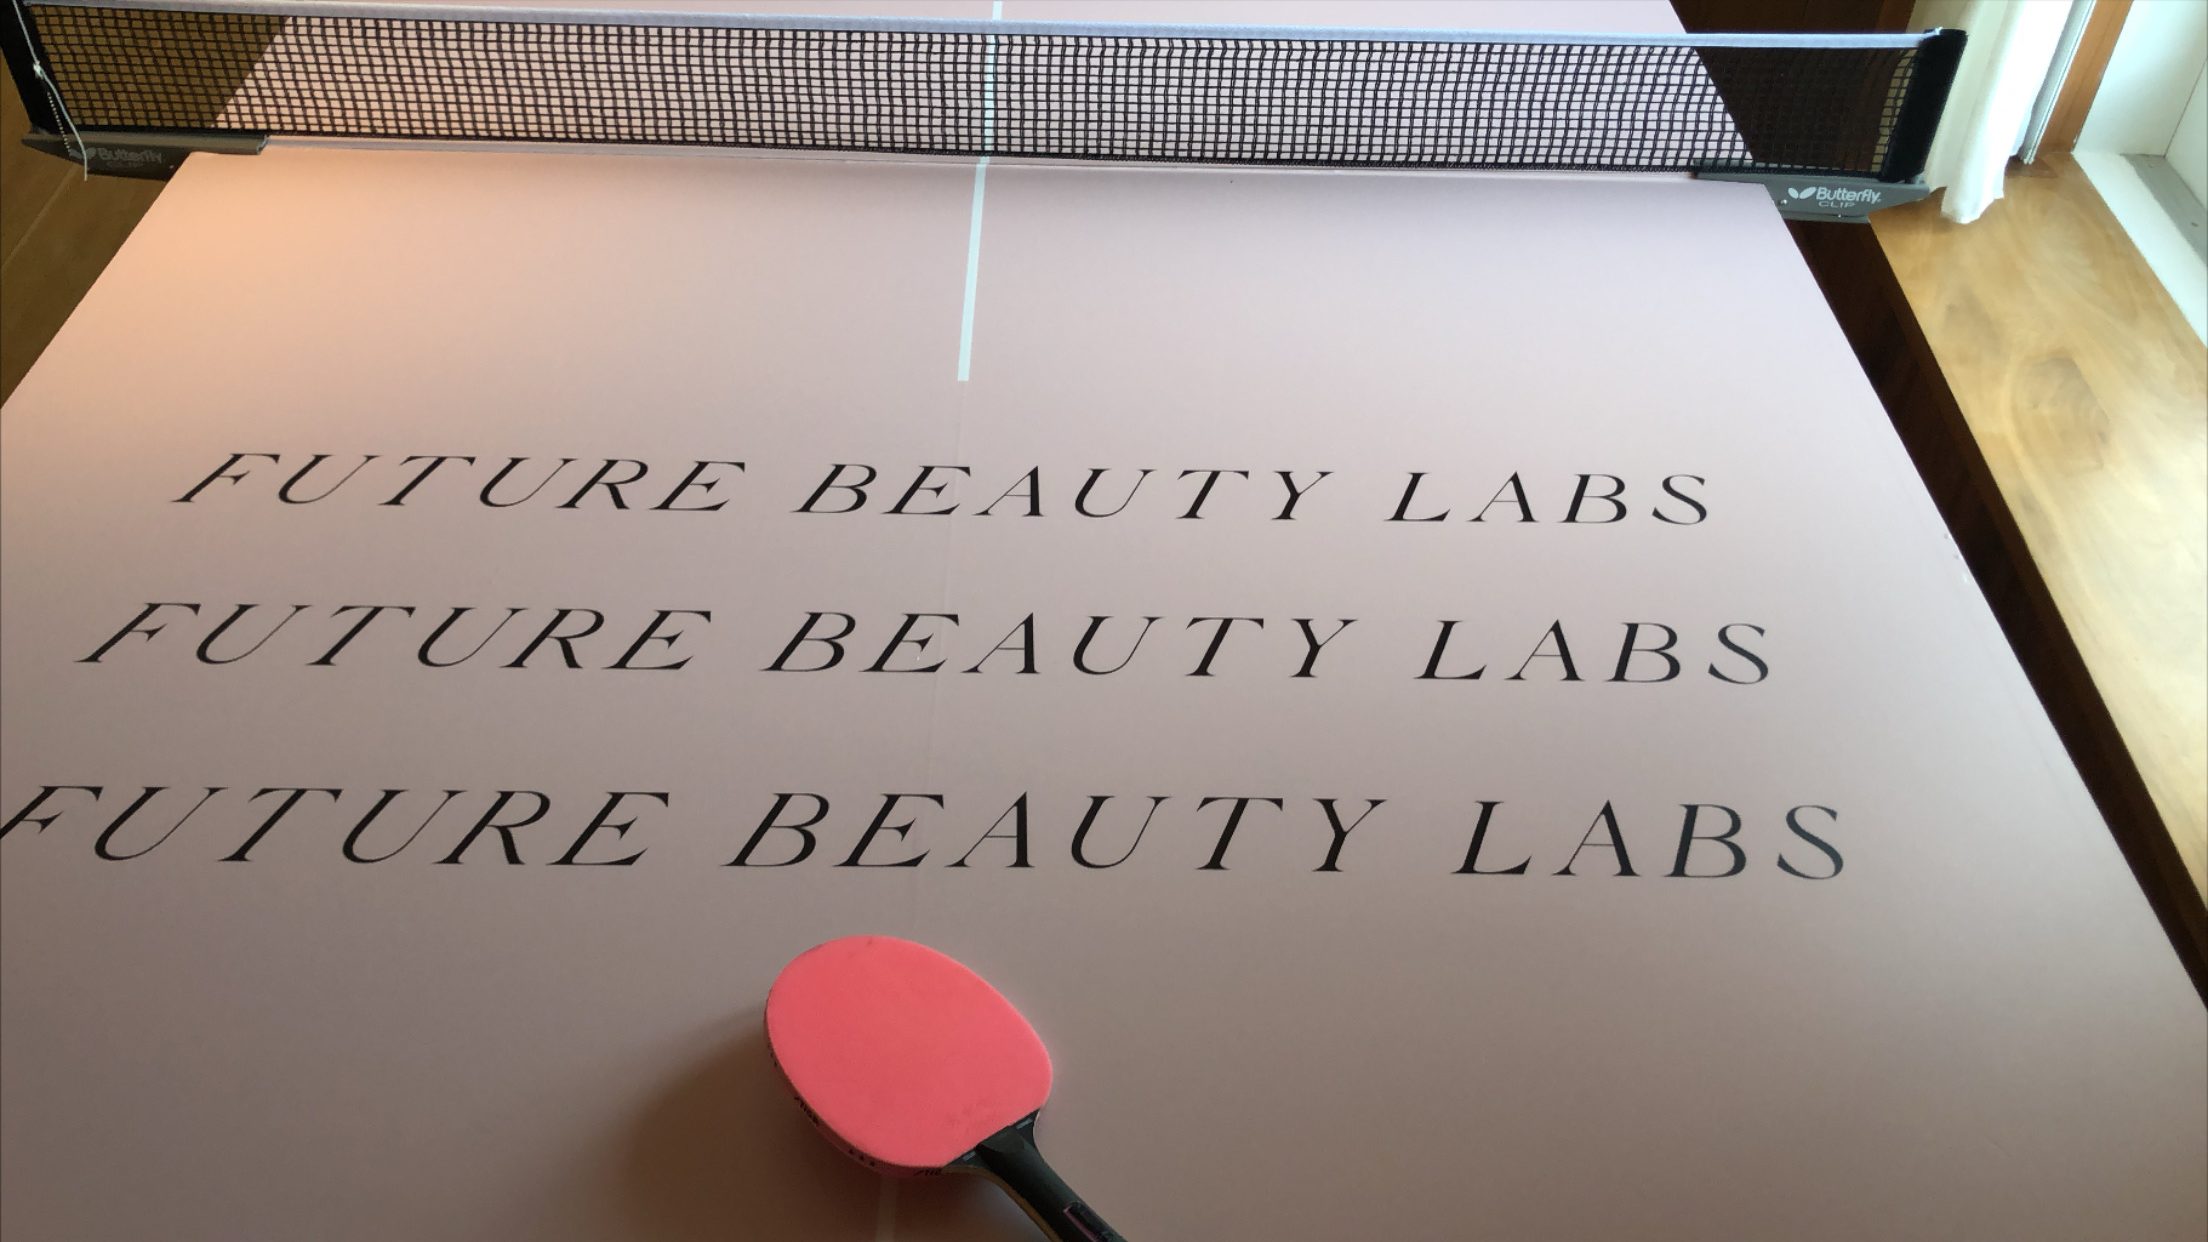 Future Beauty Labs branded table tennis